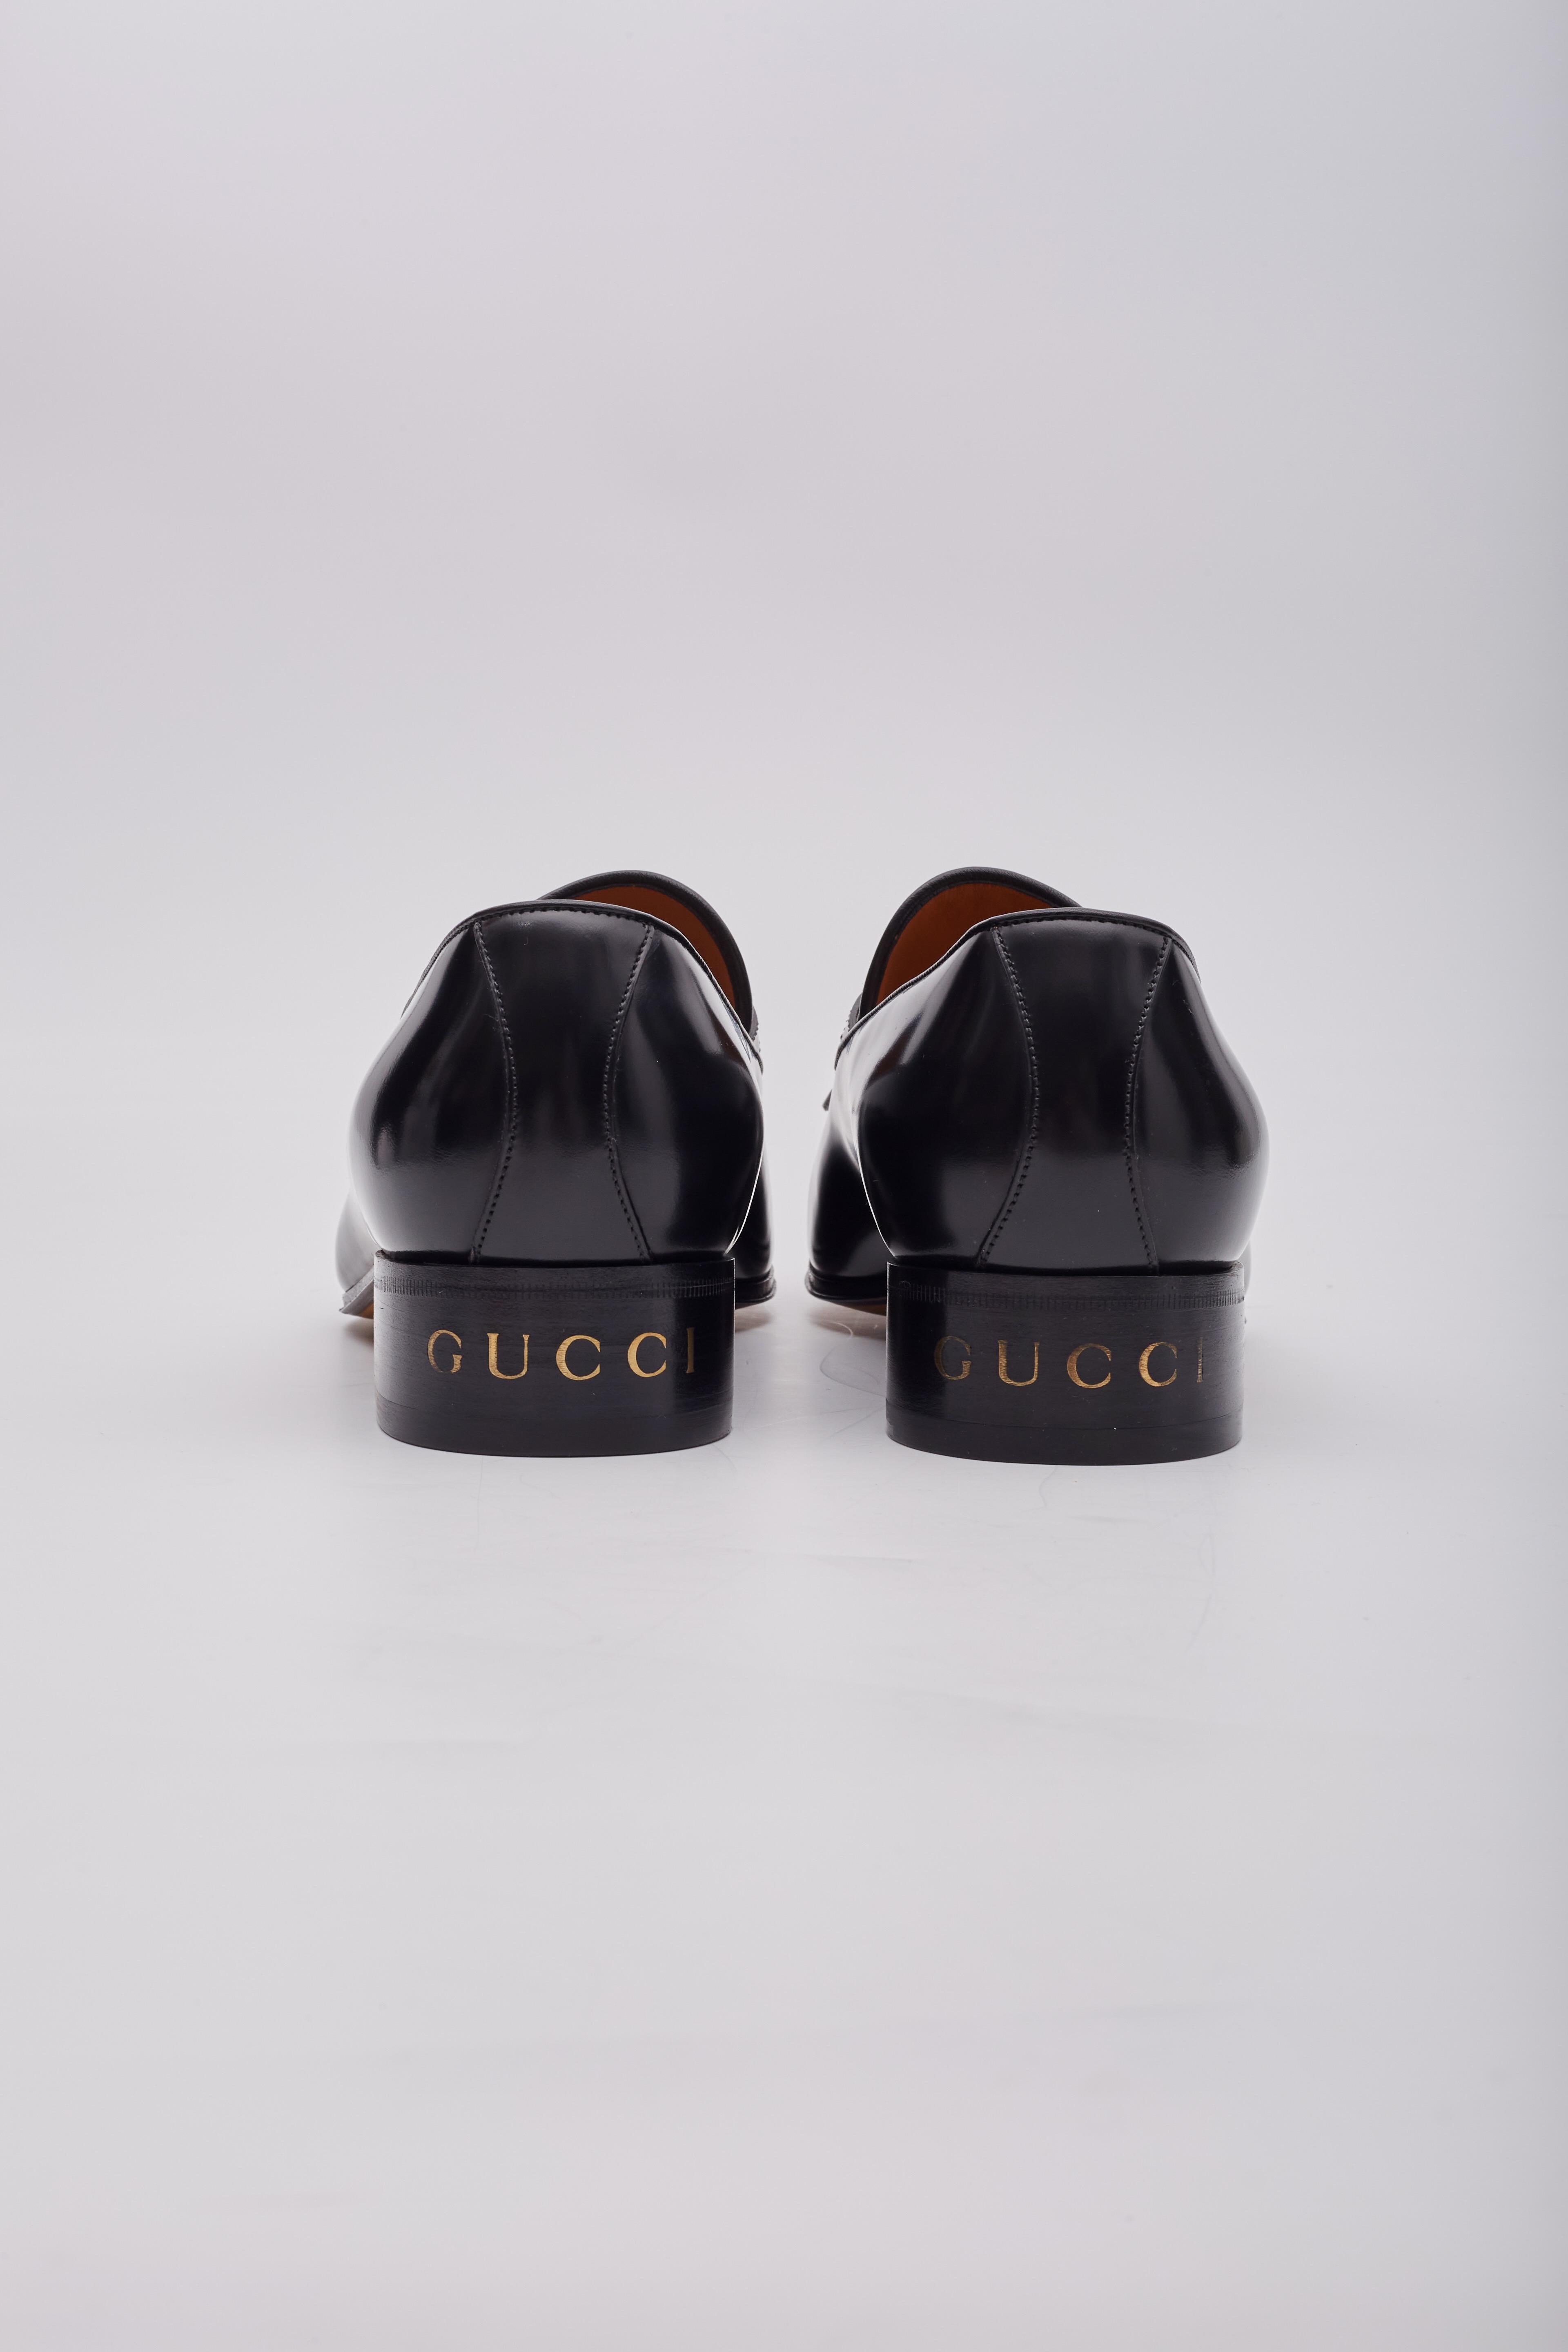 Gucci Leather Black Tassel Loafers Mens (US 11) In Excellent Condition For Sale In Montreal, Quebec